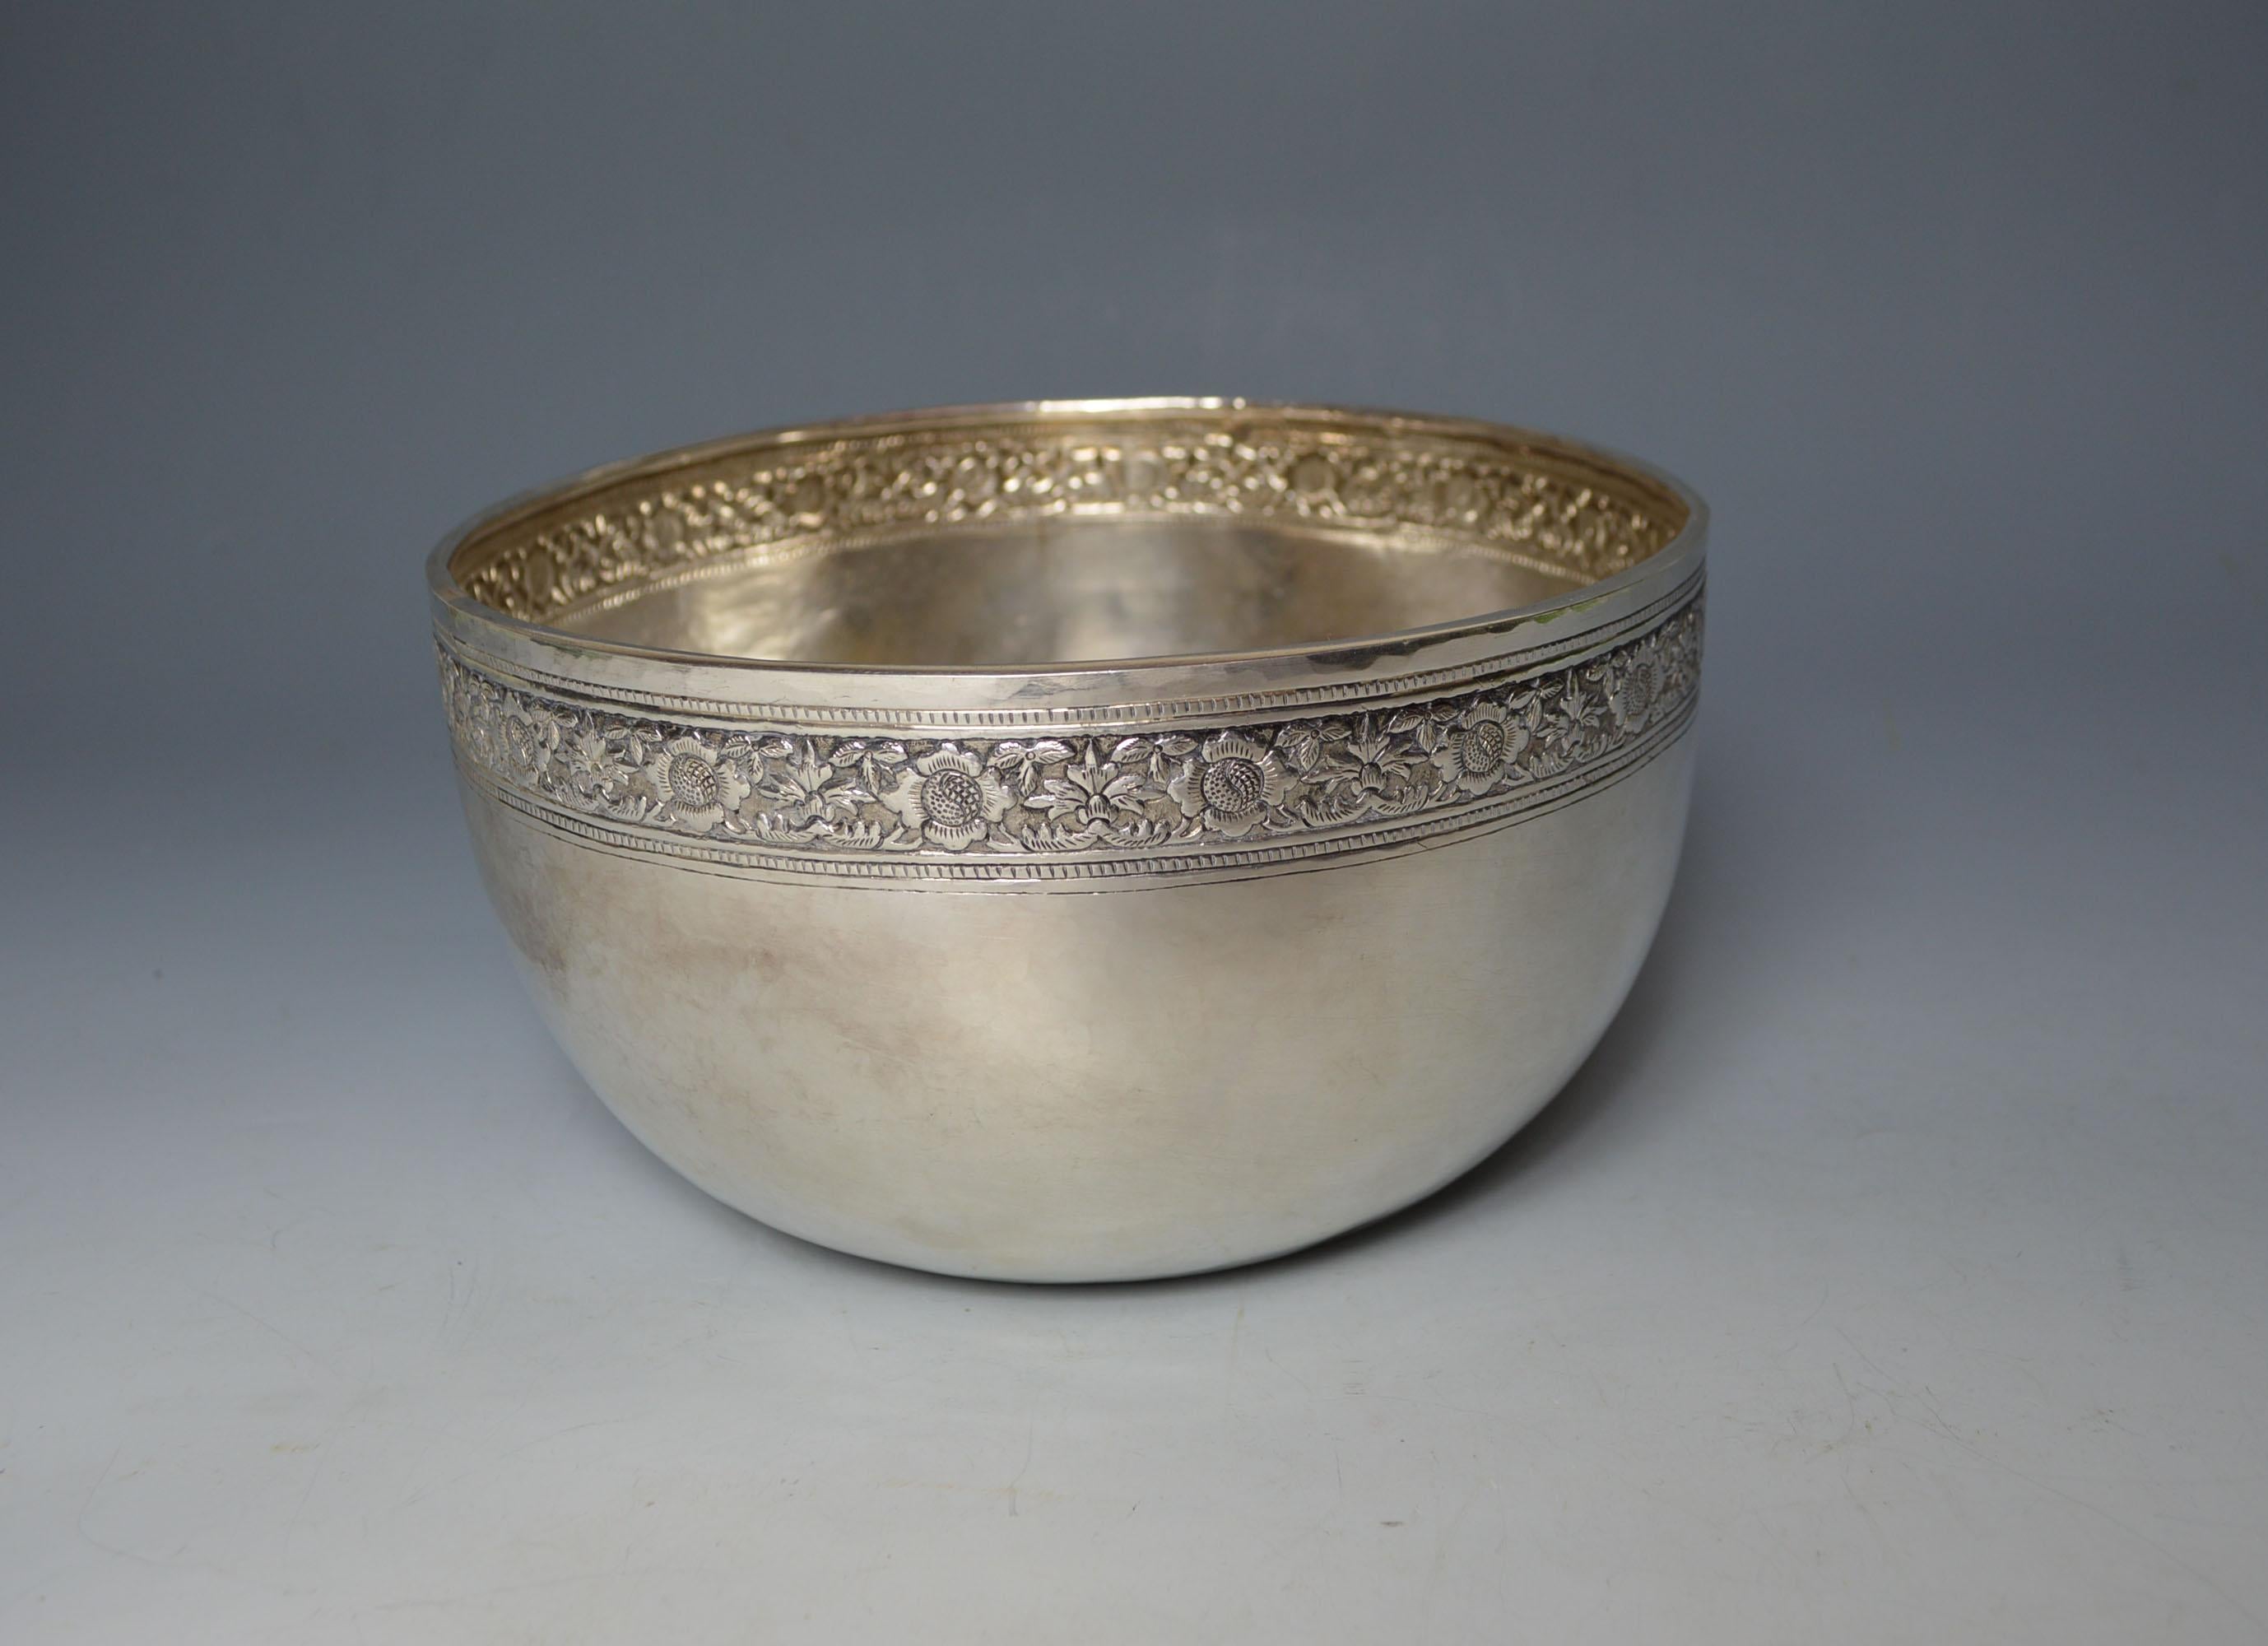 A large fine Laotian repoussé and chased silver bowl in very high grade almost pure silver with a band of leaf and flower patterns and geometric shapes with central Royal Laotian triple elephant motive flanked by lotus flowers in the central